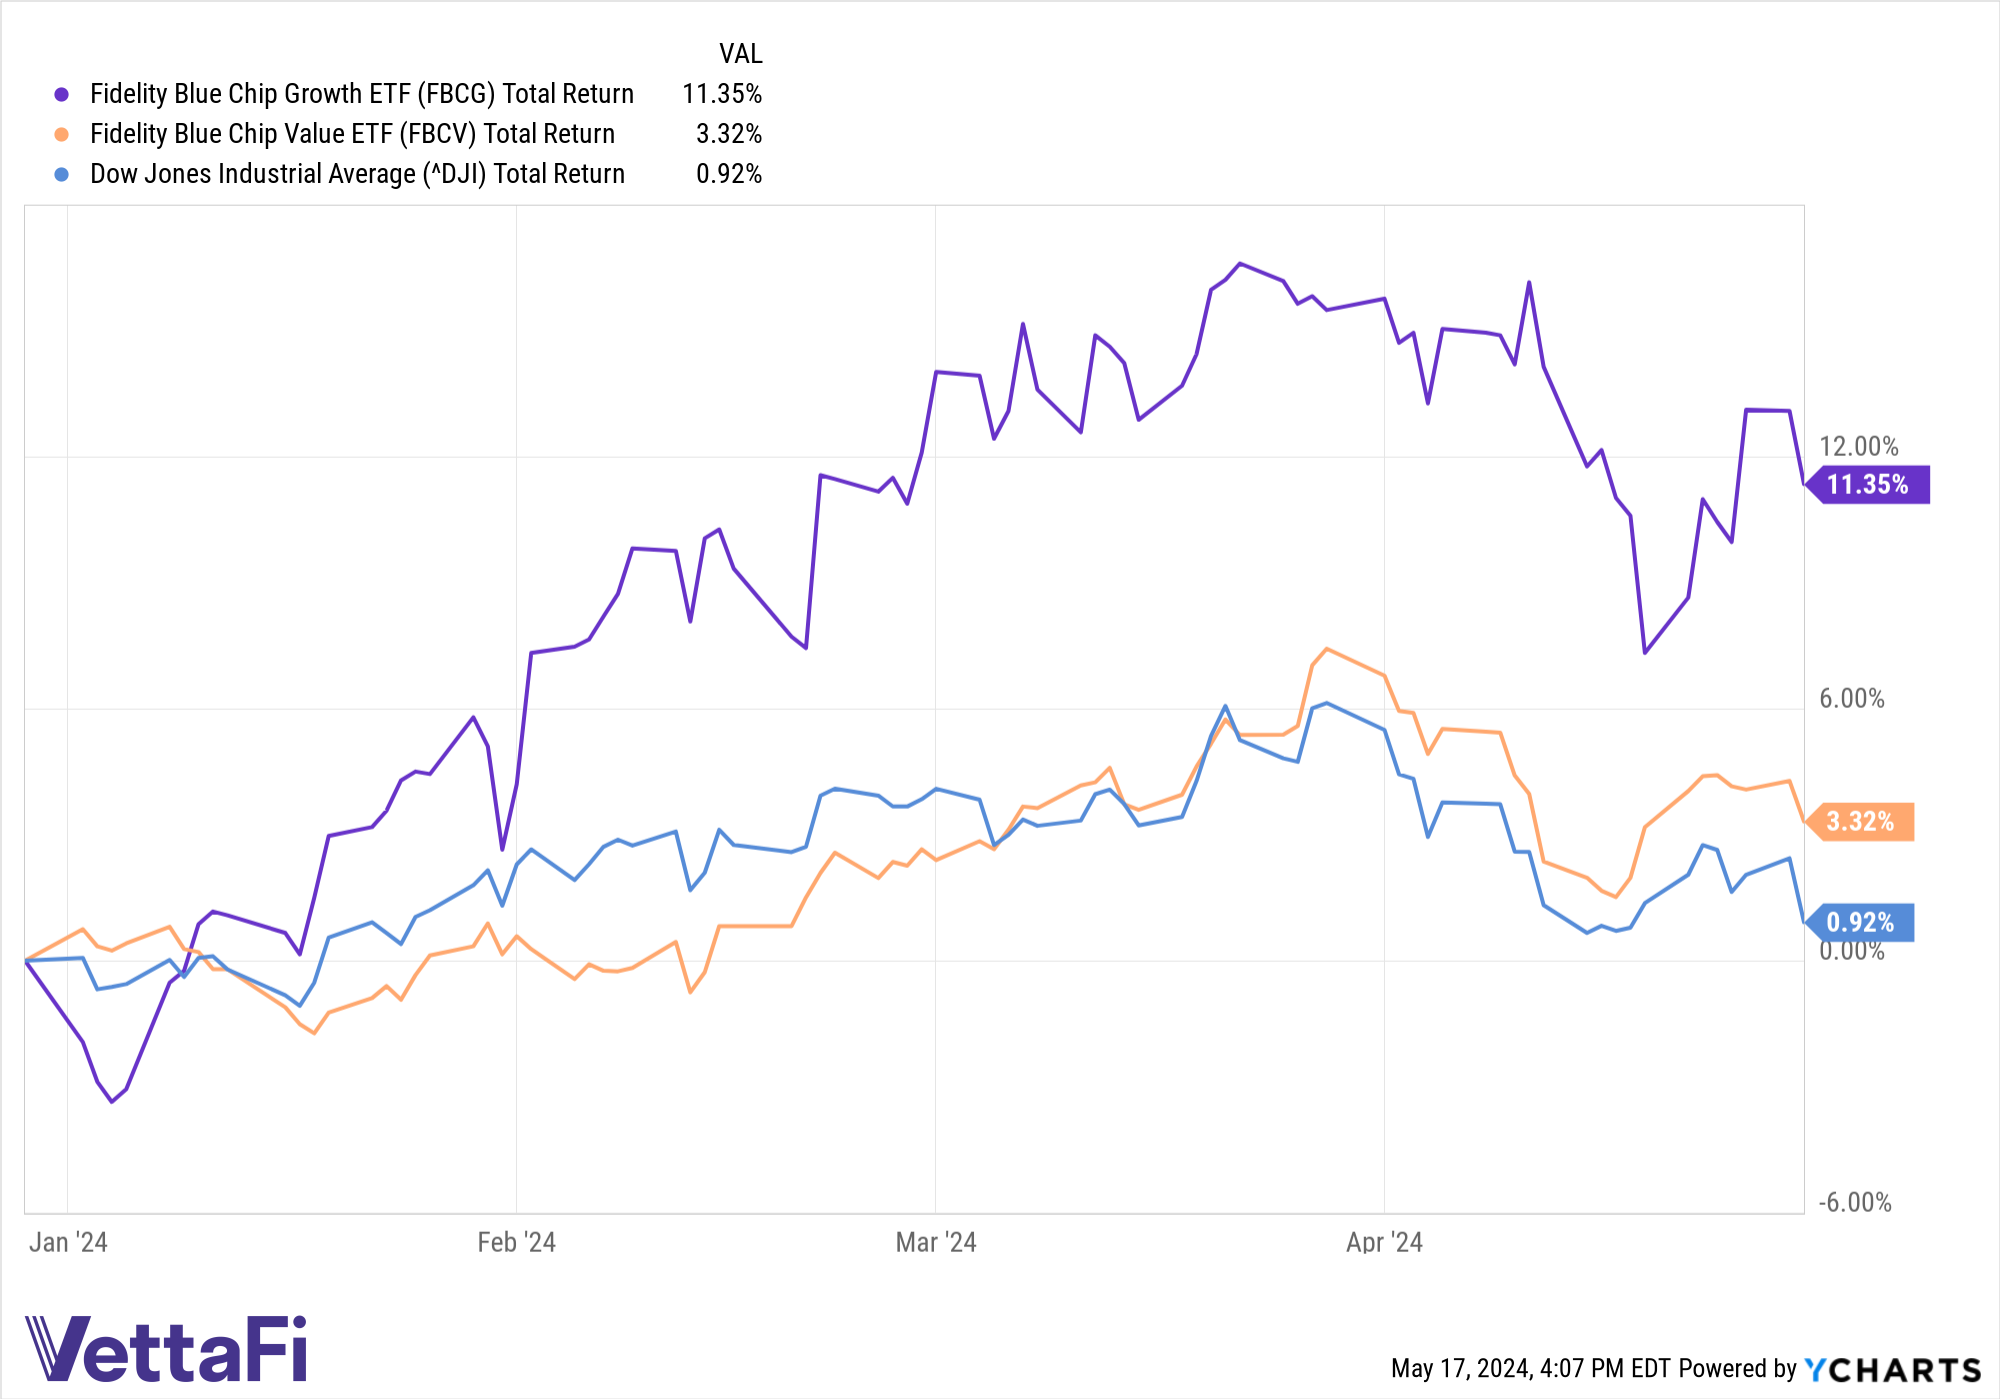 Total returns chart of FBCG, FBCV, and DJI as of the end of April 2024.